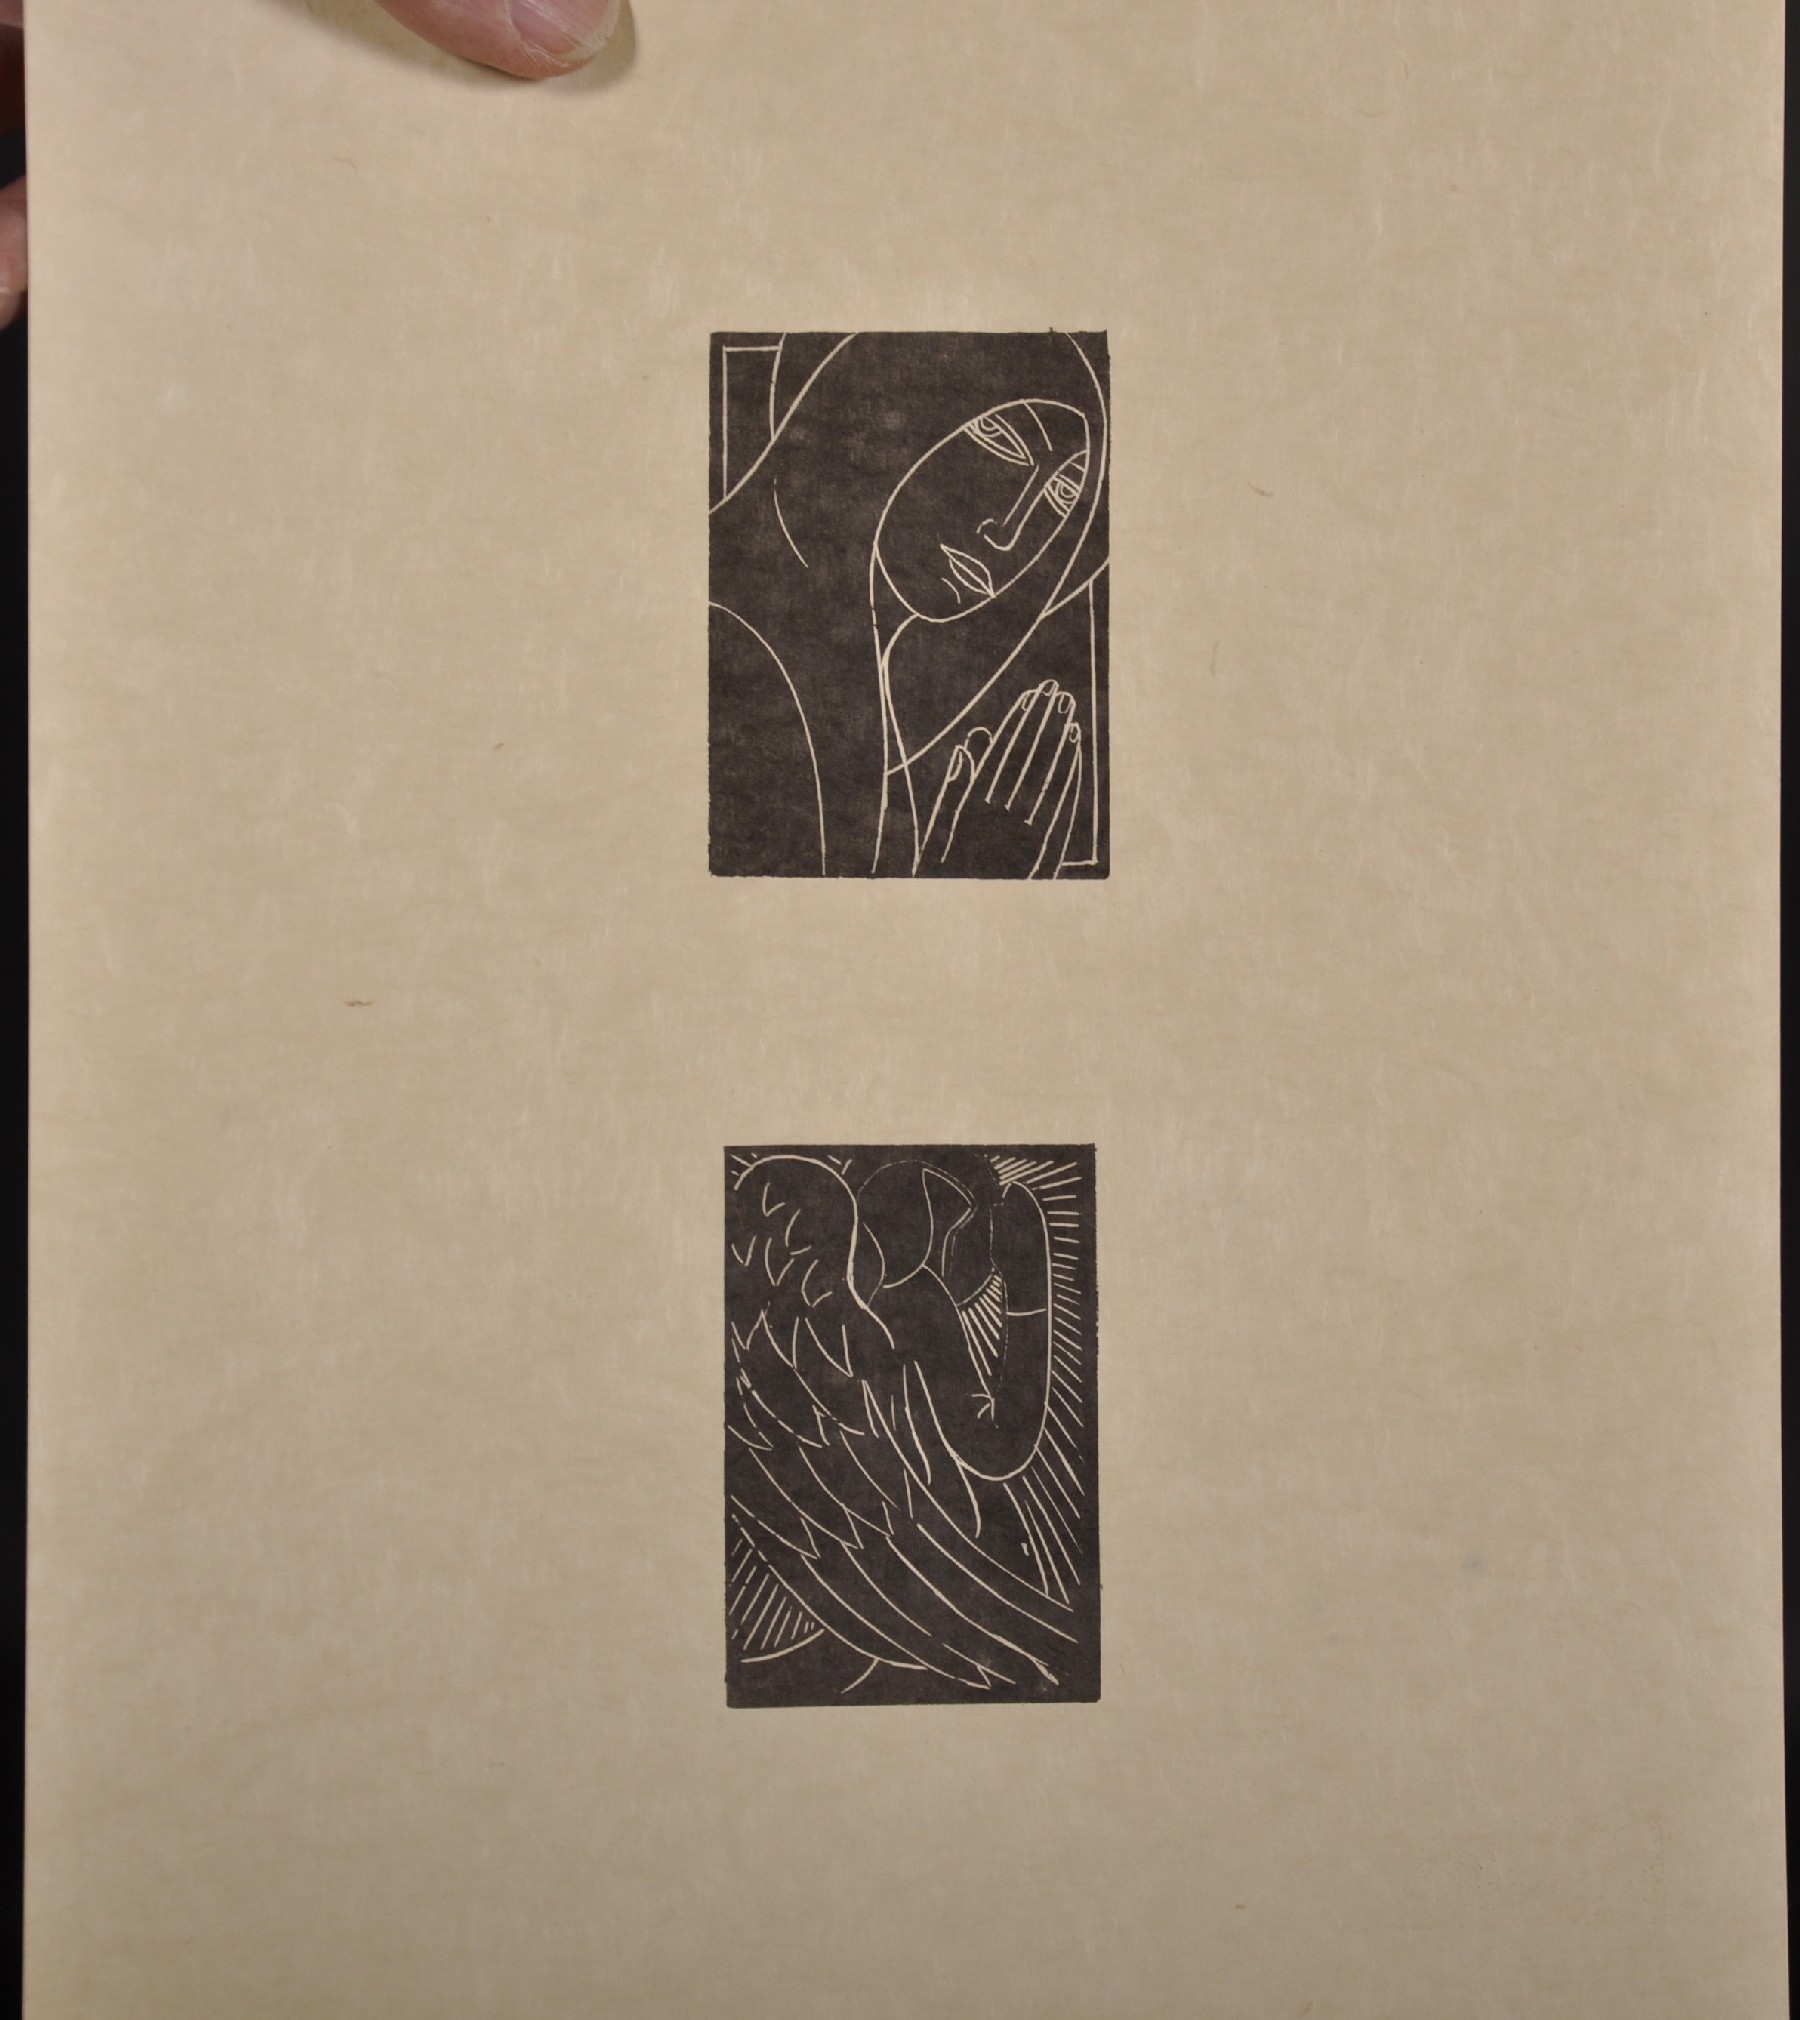 20th Century English School. A Mother and Child, Woodblock, Unframed, 4.5" x 4", and a large - Image 3 of 5